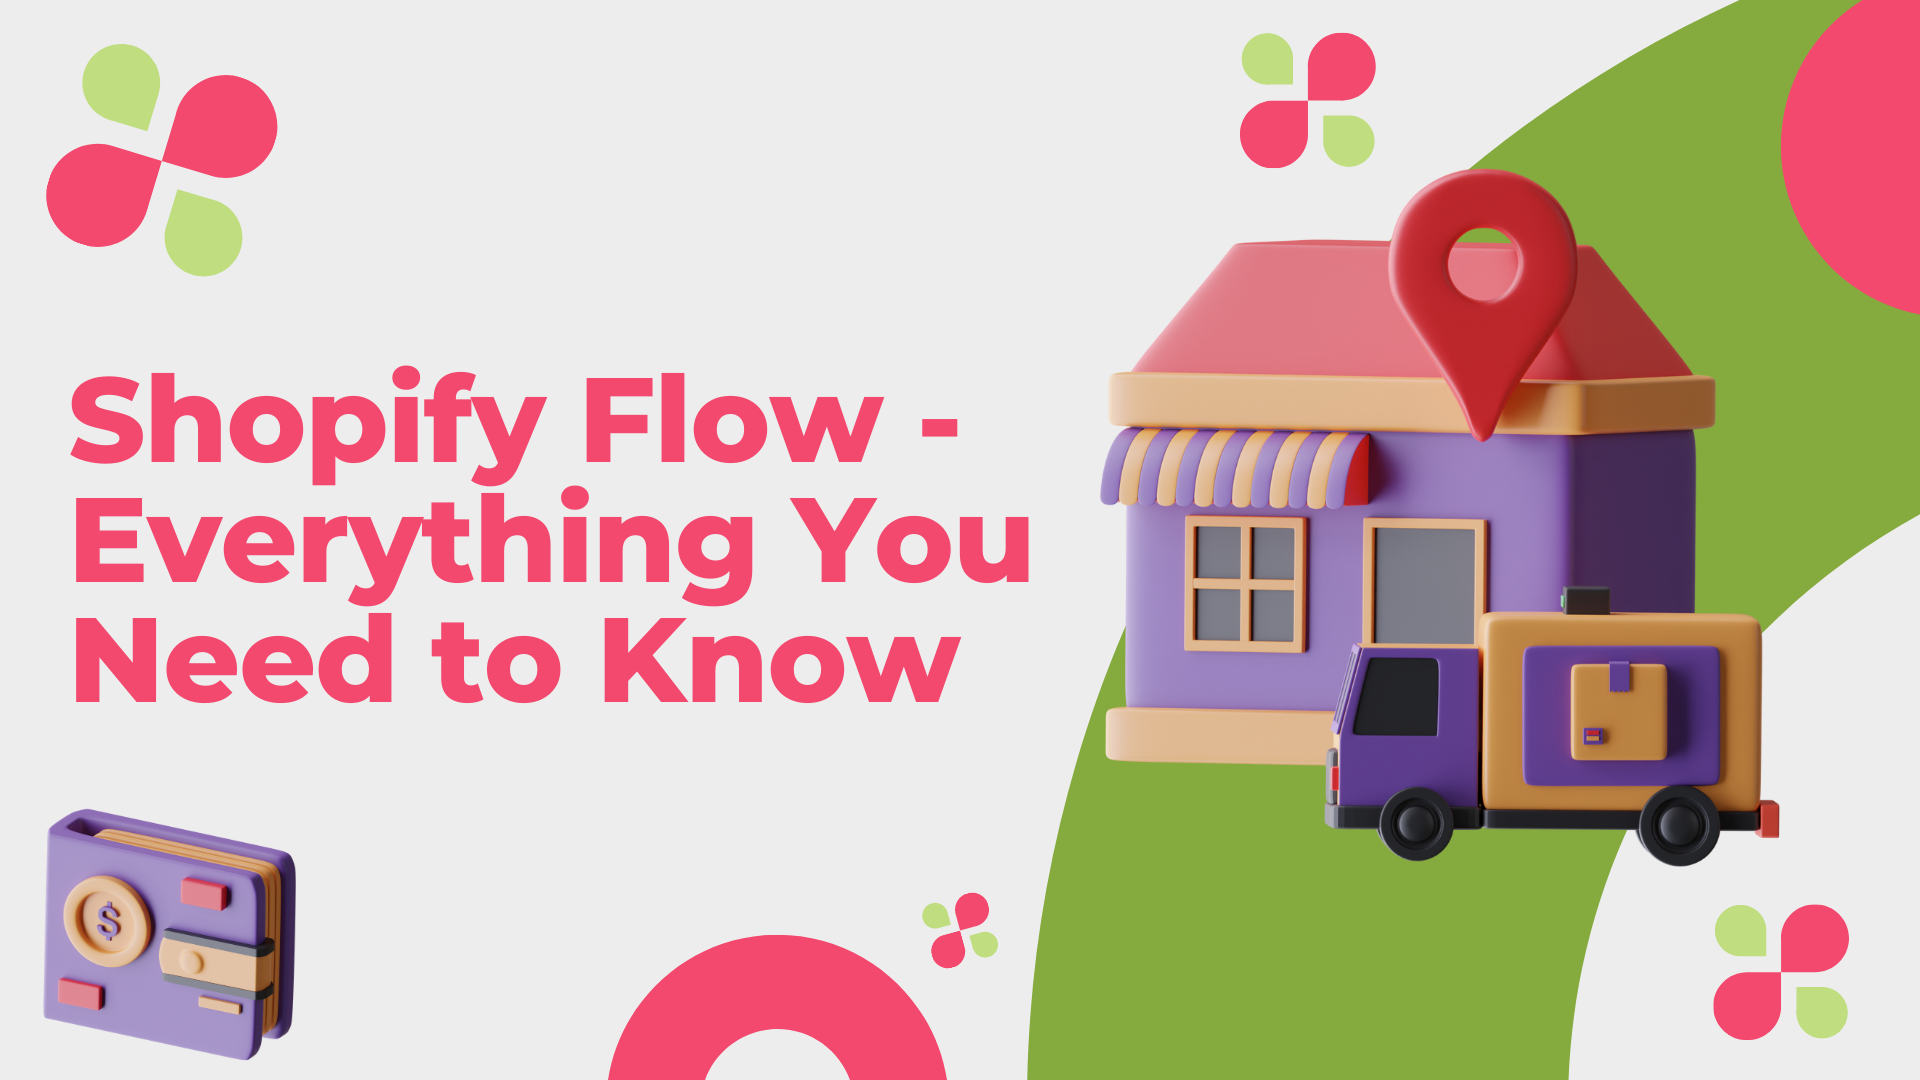 Shopify Flow - Everything You Need to Know